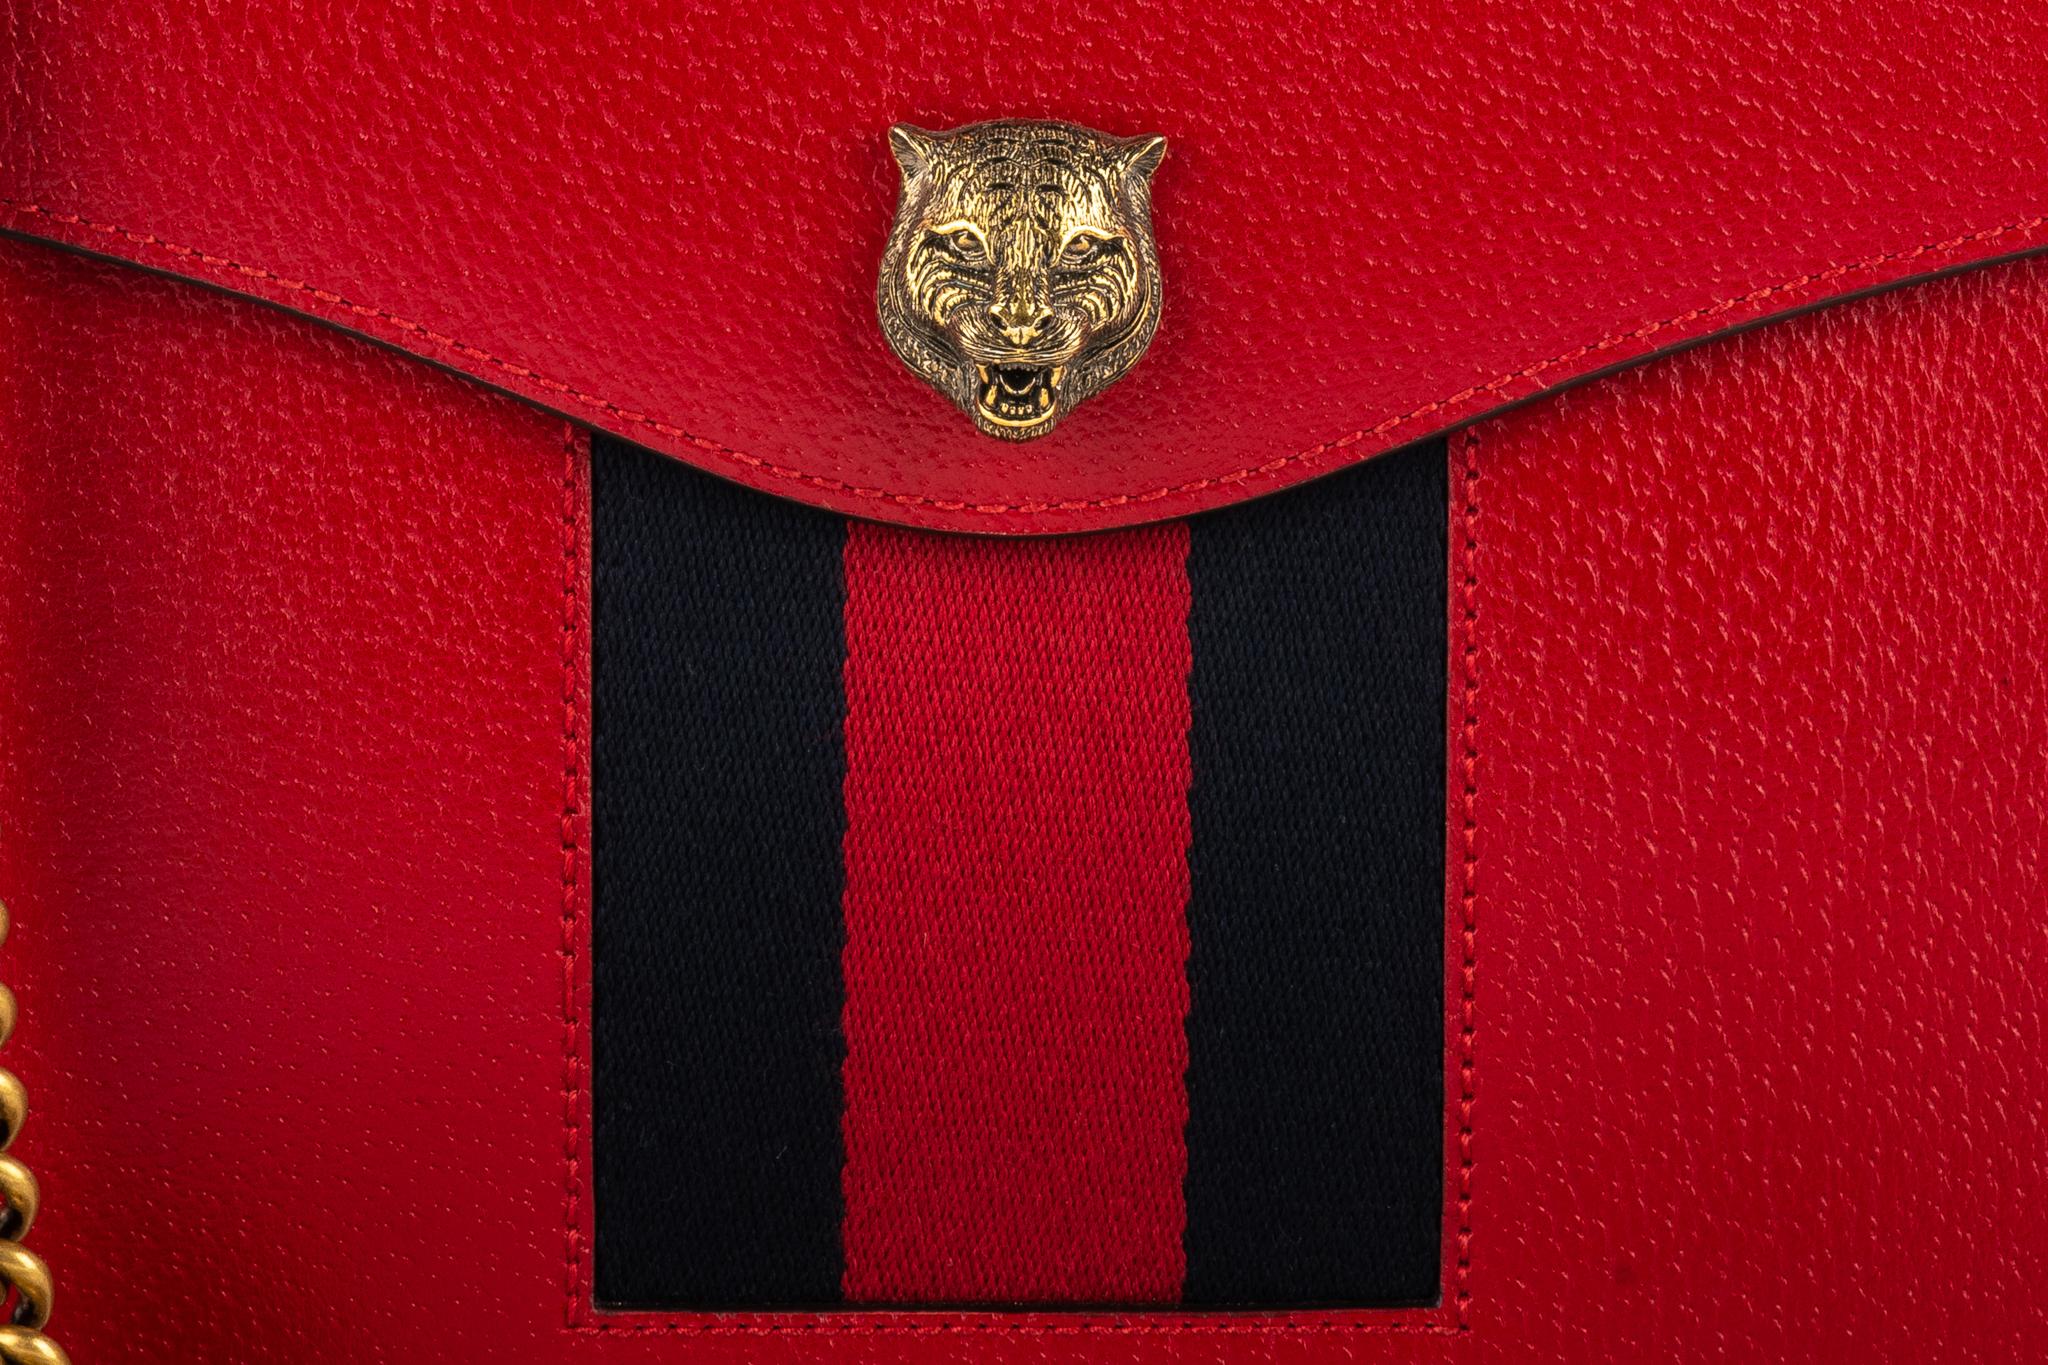 Gucci red durable leather striped cross body bag. Lions head accent. 
Shoulder drop 22.5